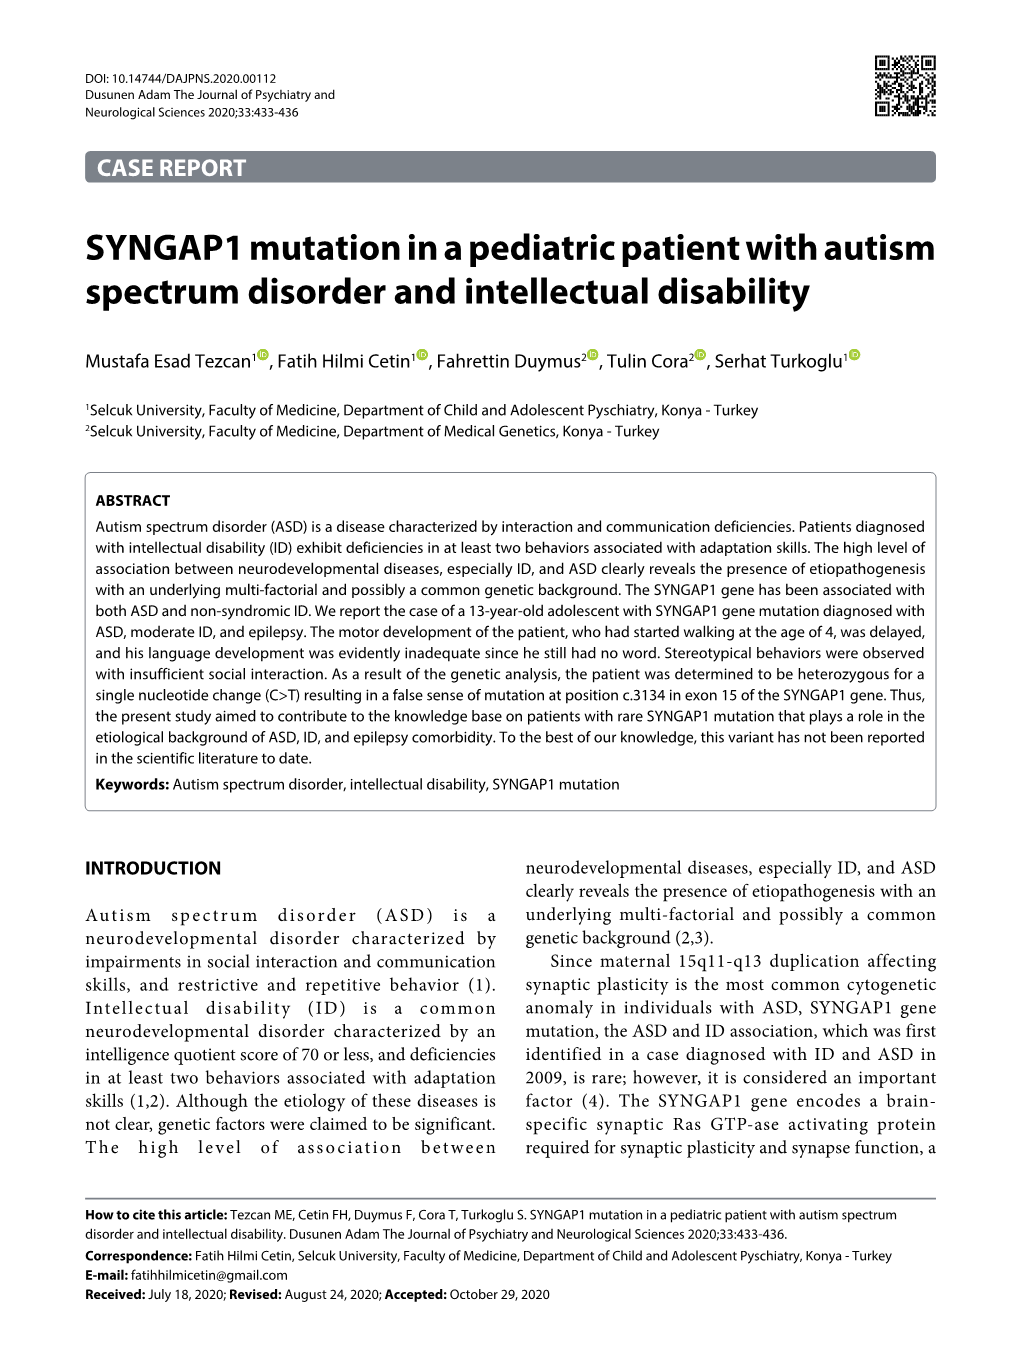 SYNGAP1 Mutation in a Pediatric Patient with Autism Spectrum Disorder and Intellectual Disability